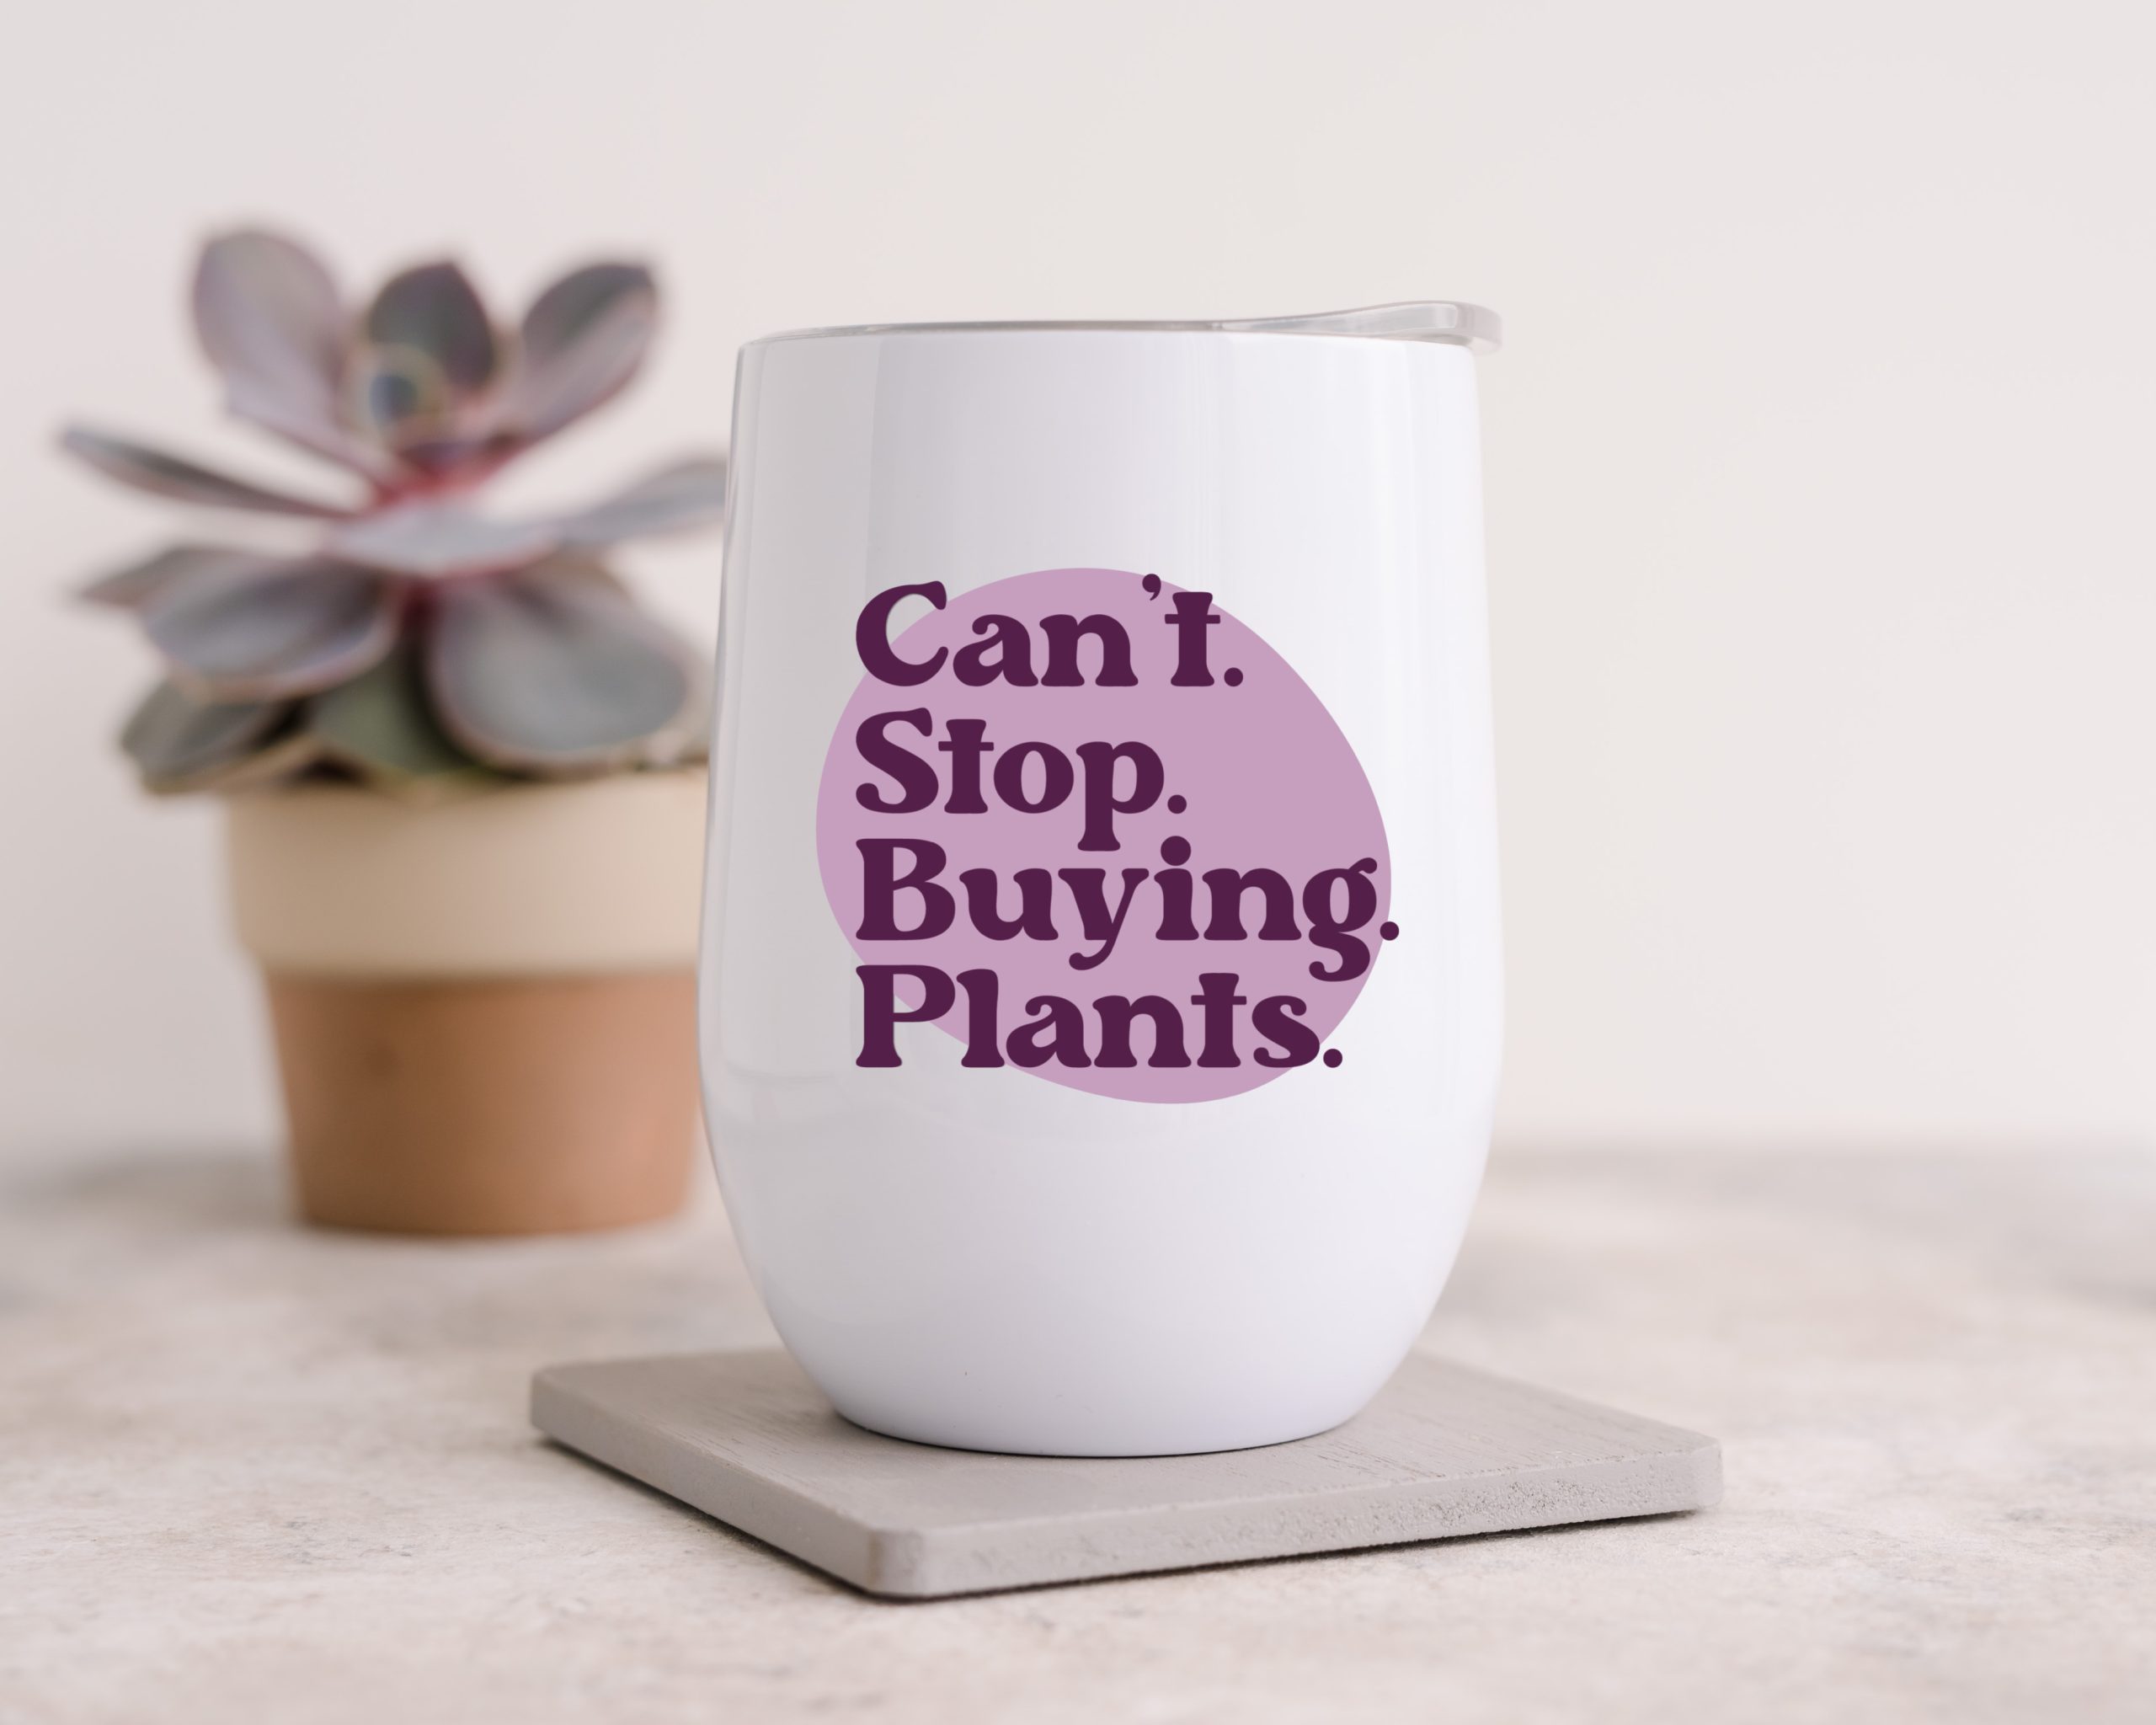 Can't Stop Buying Plants design on a travel wine glass.